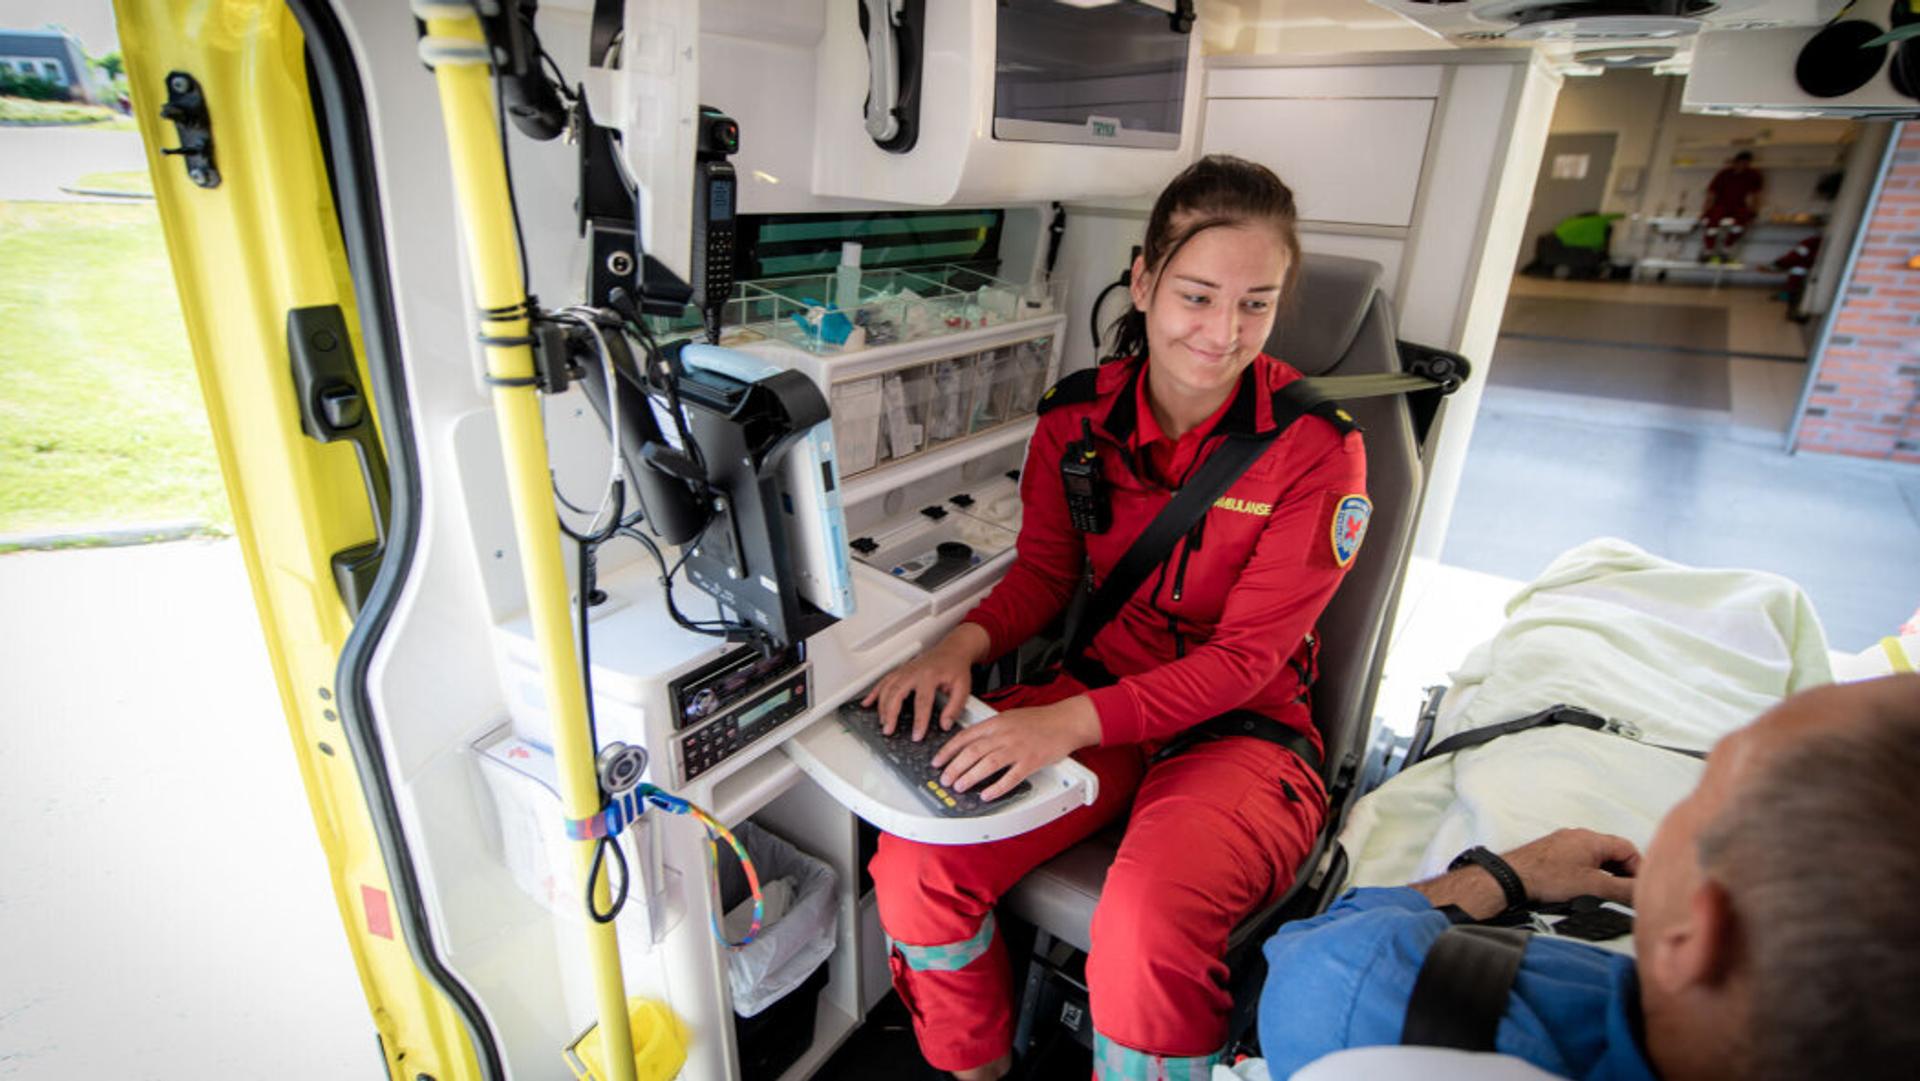 Female paramedic in a red suit working at a tablet and male patient on a gurney